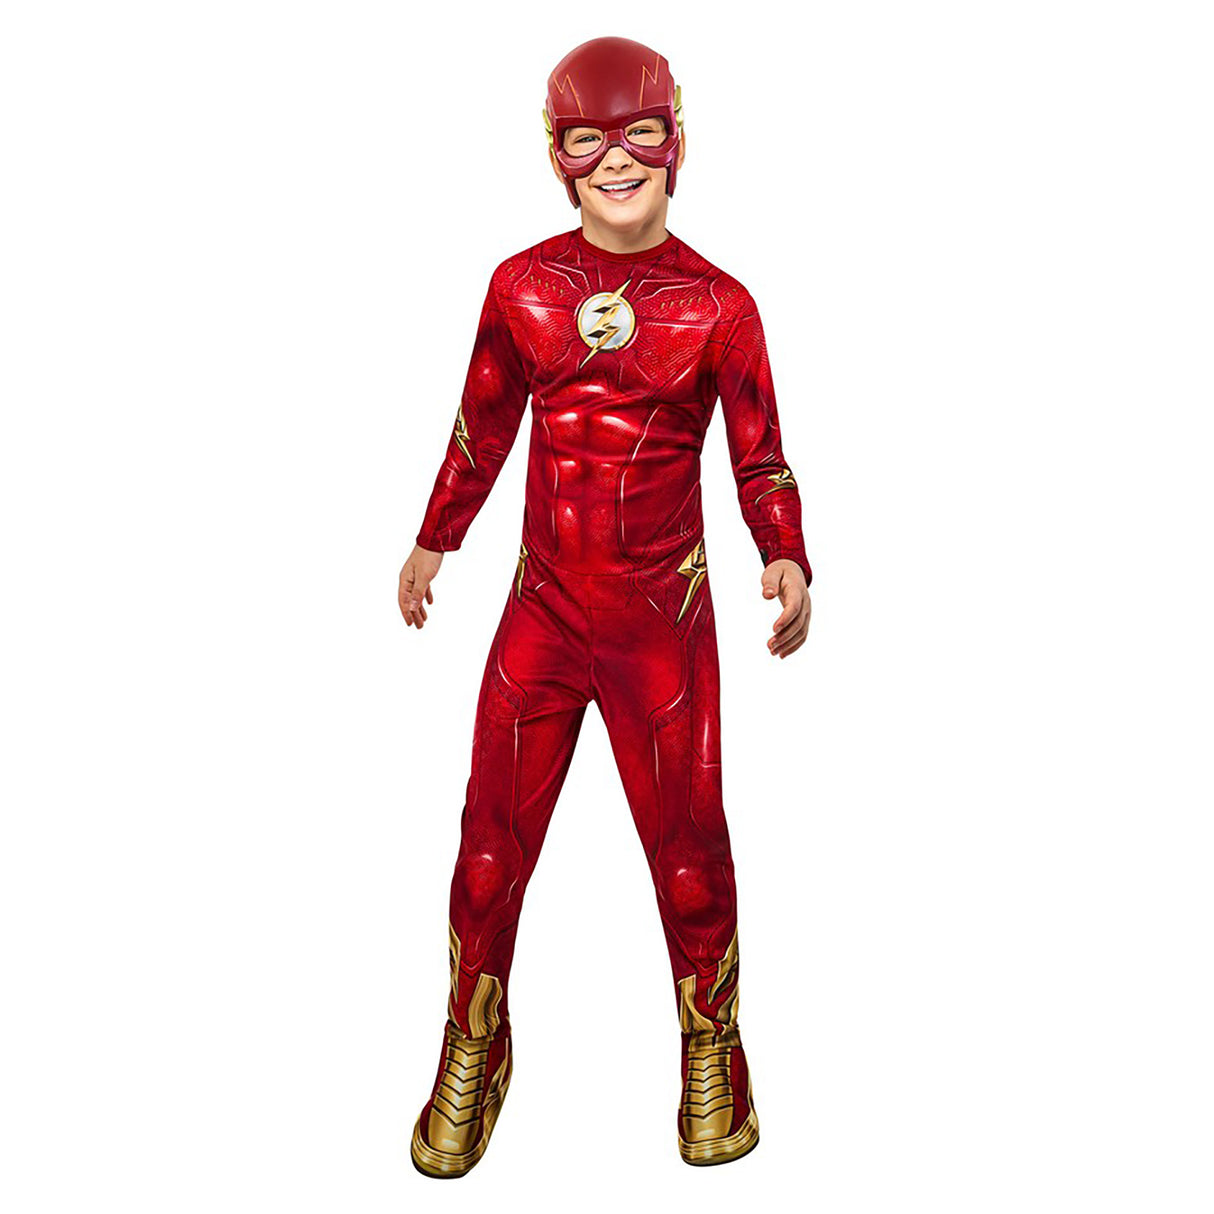 Rubies The Flash Deluxe Costume (3-5 years)